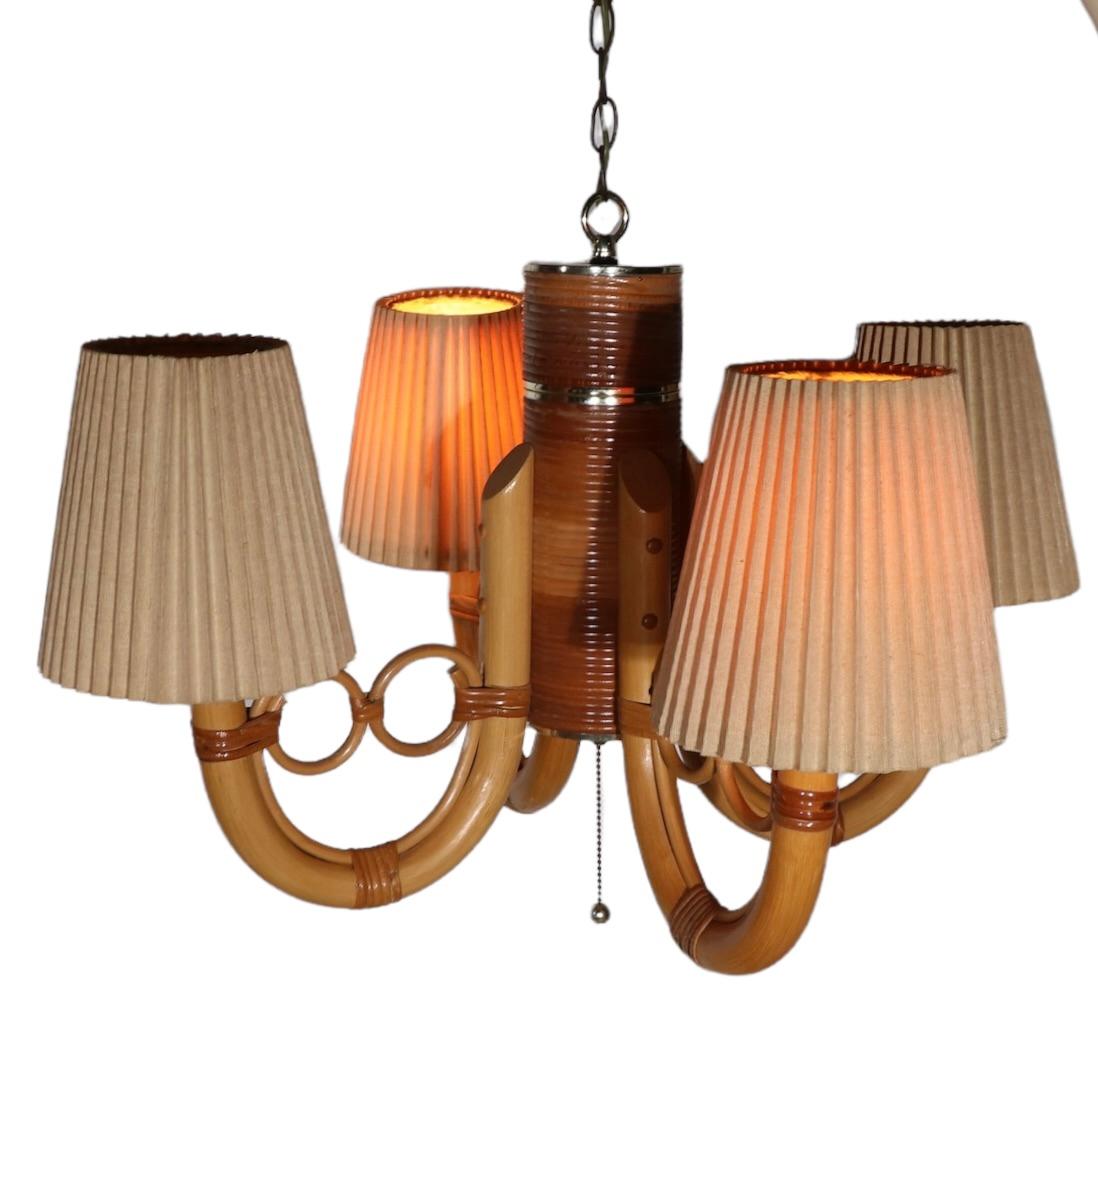 Mod Style Four Arm Bamboo Chandelier by Maxim Lighting Los Angeles, Ca. 1970's For Sale 1